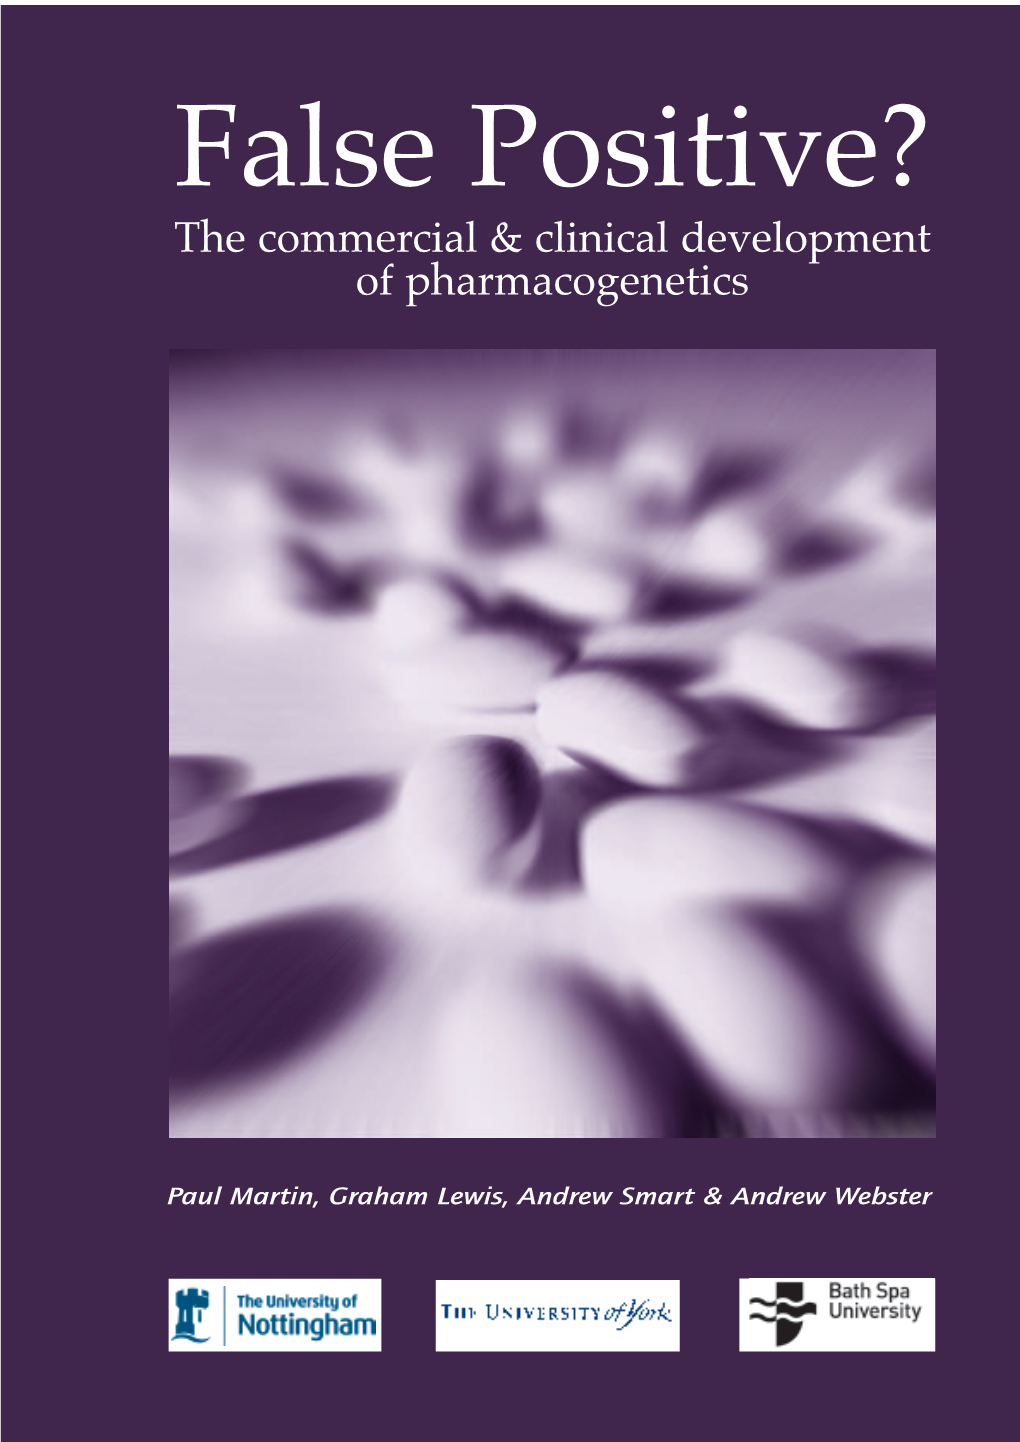 The Commercial & Clinical Development of Pharmacogenetics